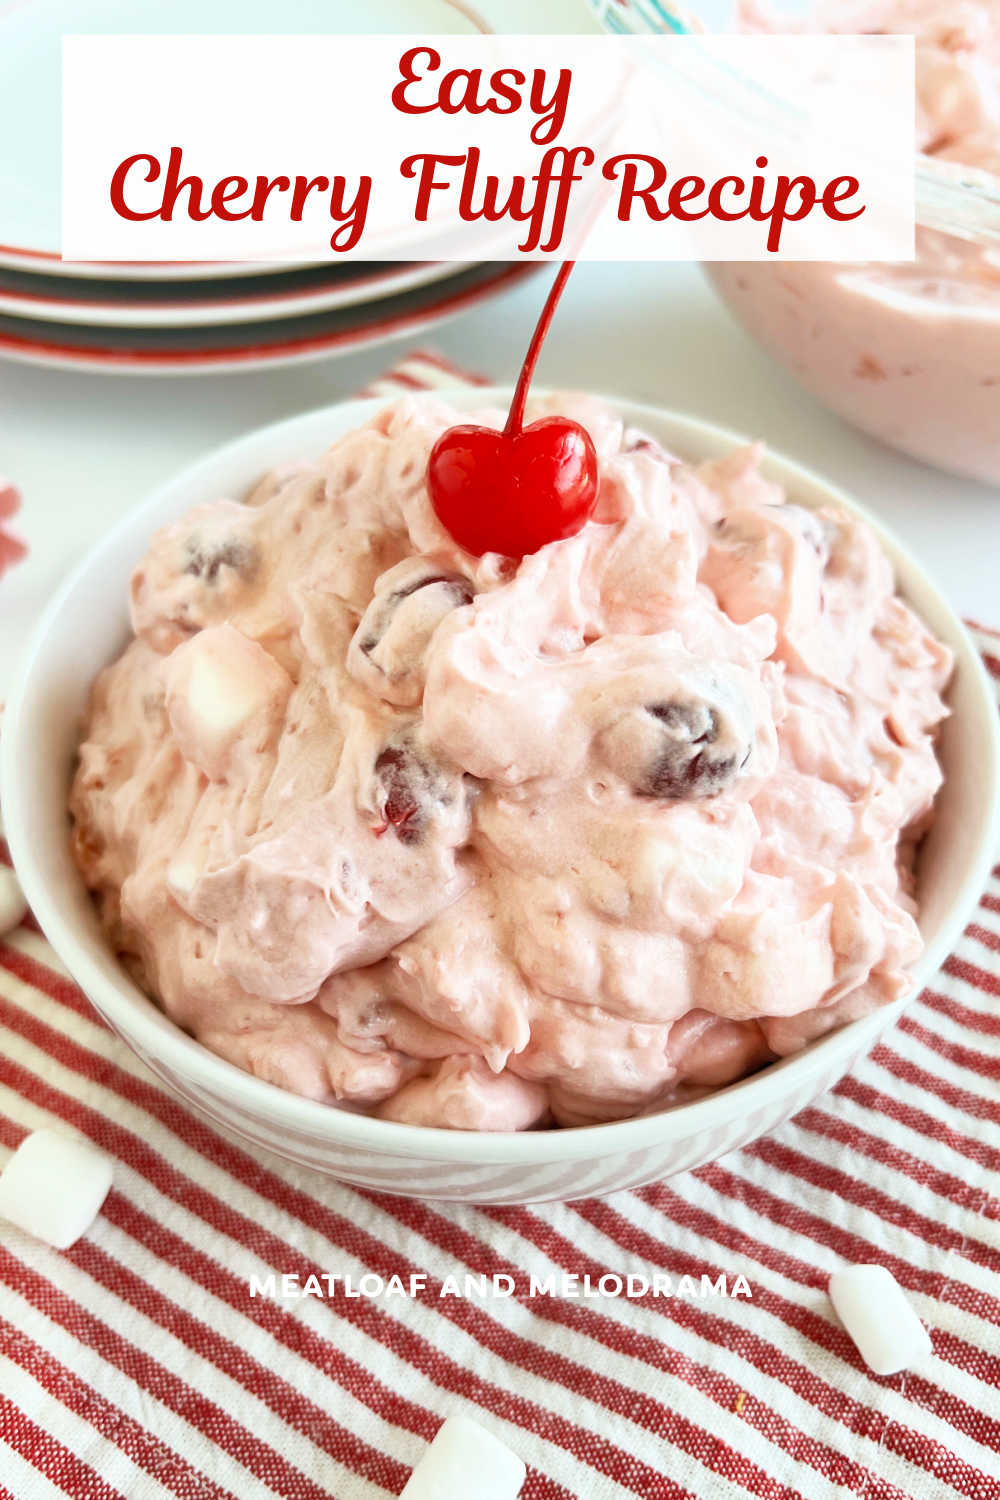 Cherry Fluff is an easy recipe for a classic dessert salad made with cherry pie filling, crushed pineapple, Cool Whip, mini marshmallows and vanilla pudding mix. This easy recipe makes a great side dish for family gatherings, potluck dinners or any special occasion! via @meamel